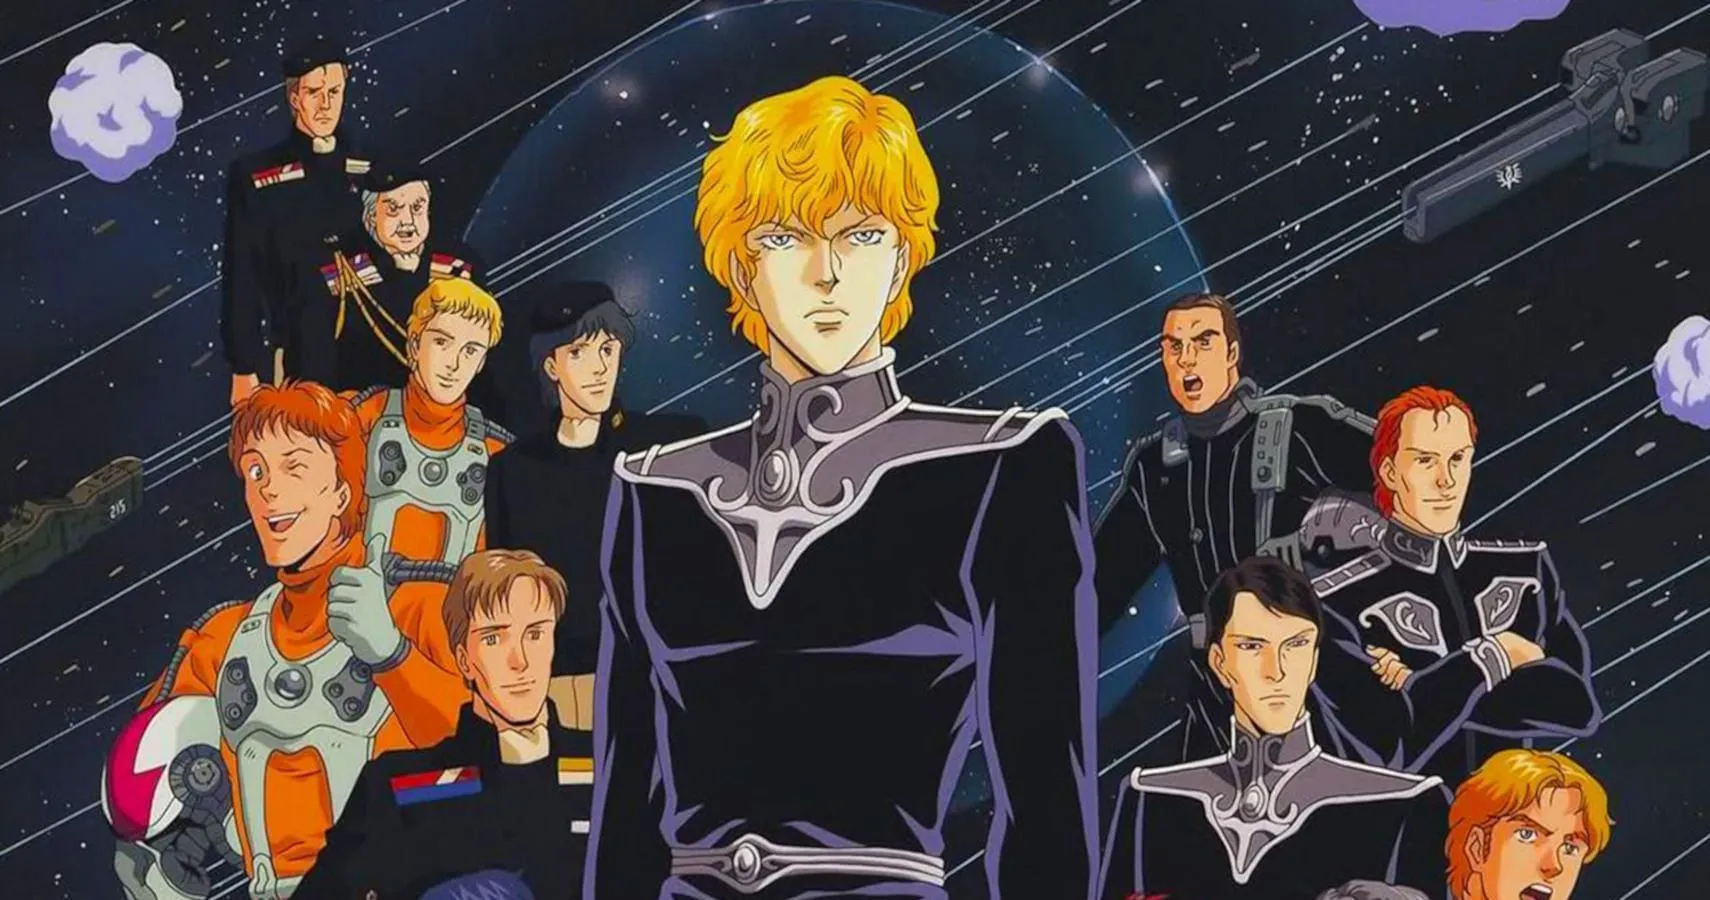 Legend of The Galactic Heroes (Image via Kitty Films)